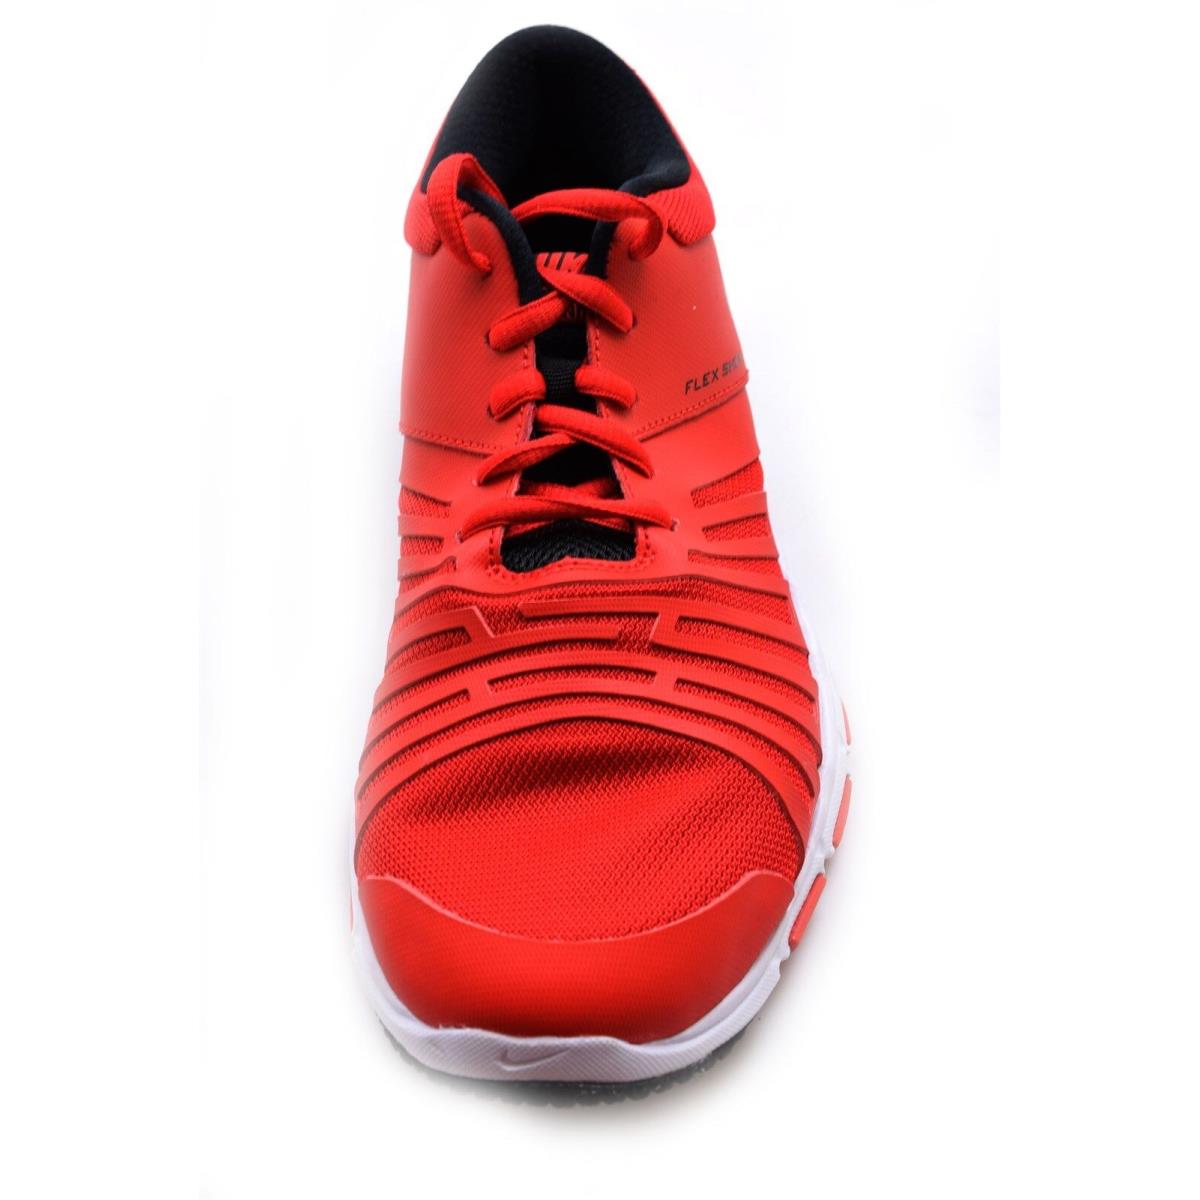 Nike shoes  - Red / White 2